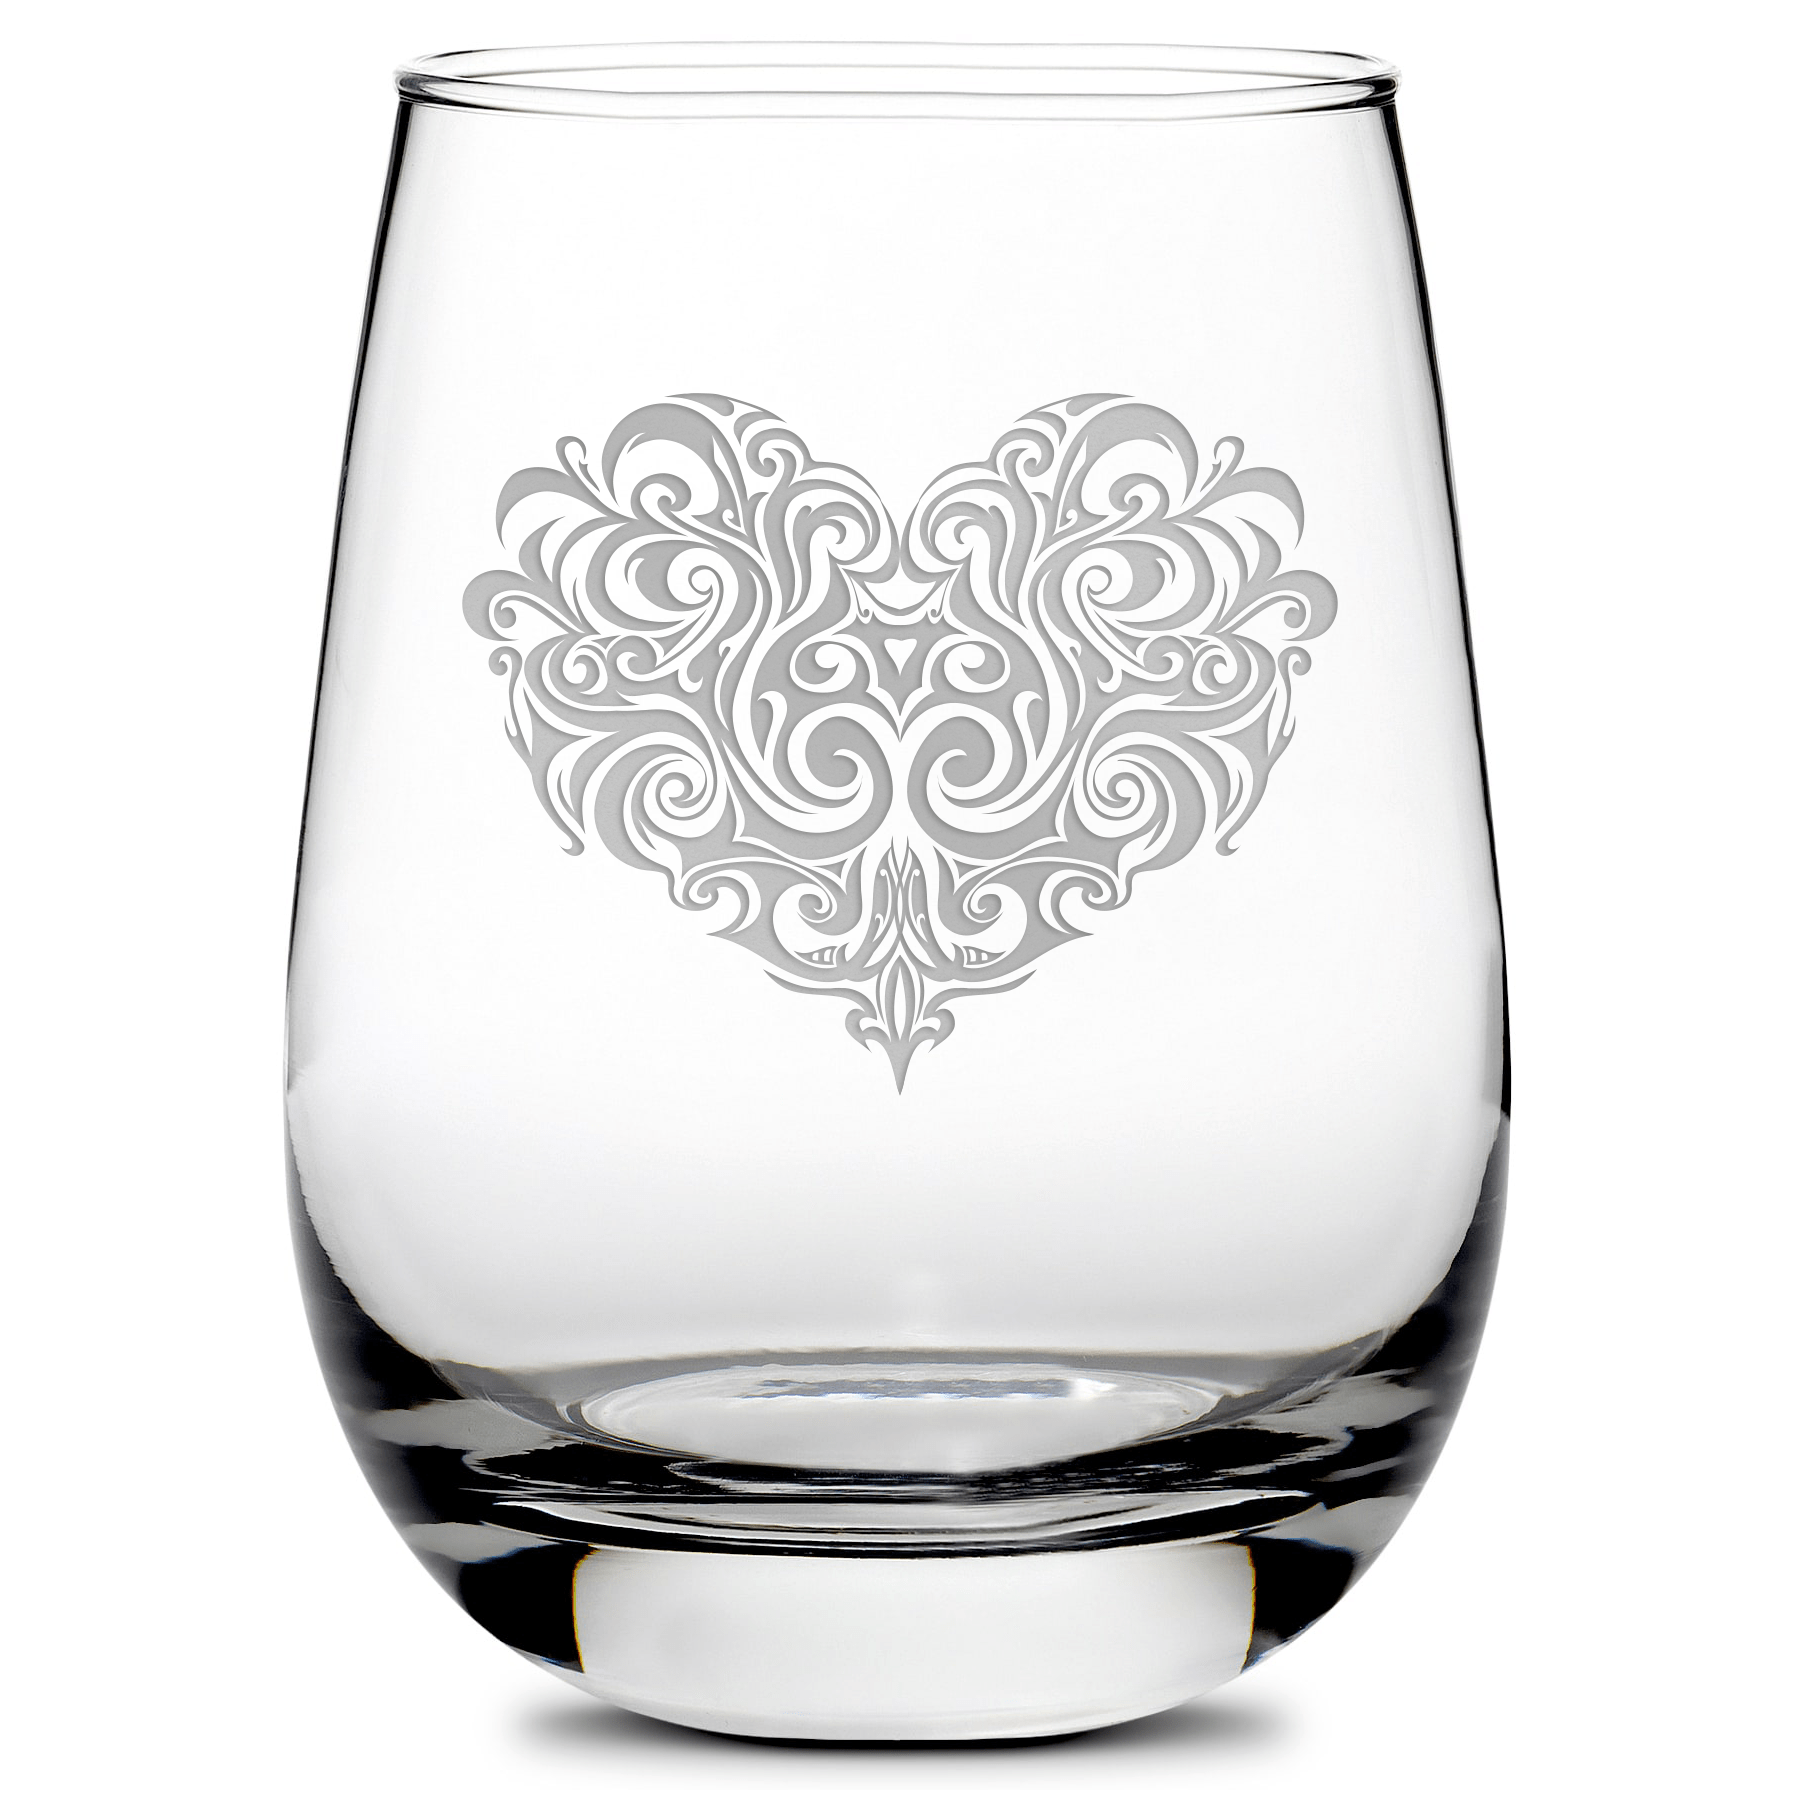 Stemless Wine Glass, Tribal Heart Design, Hand Etched, 16oz by Integrity Bottles